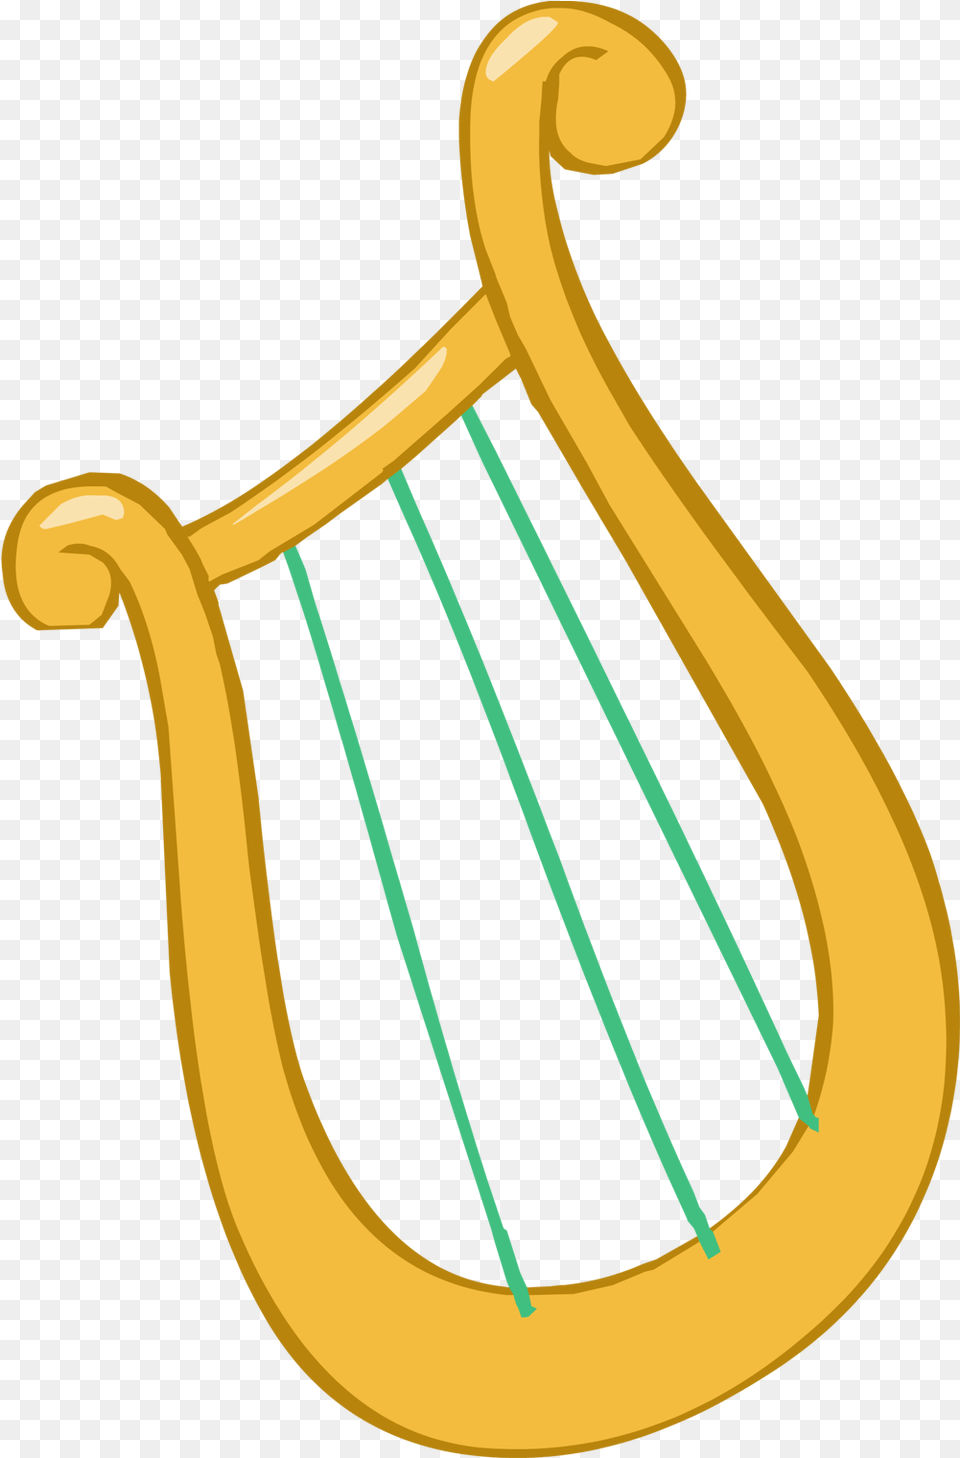 Lyre Clipart Transparent Stickpng Mlp Lyra Cutie Mark, Harp, Musical Instrument, Smoke Pipe Png Image